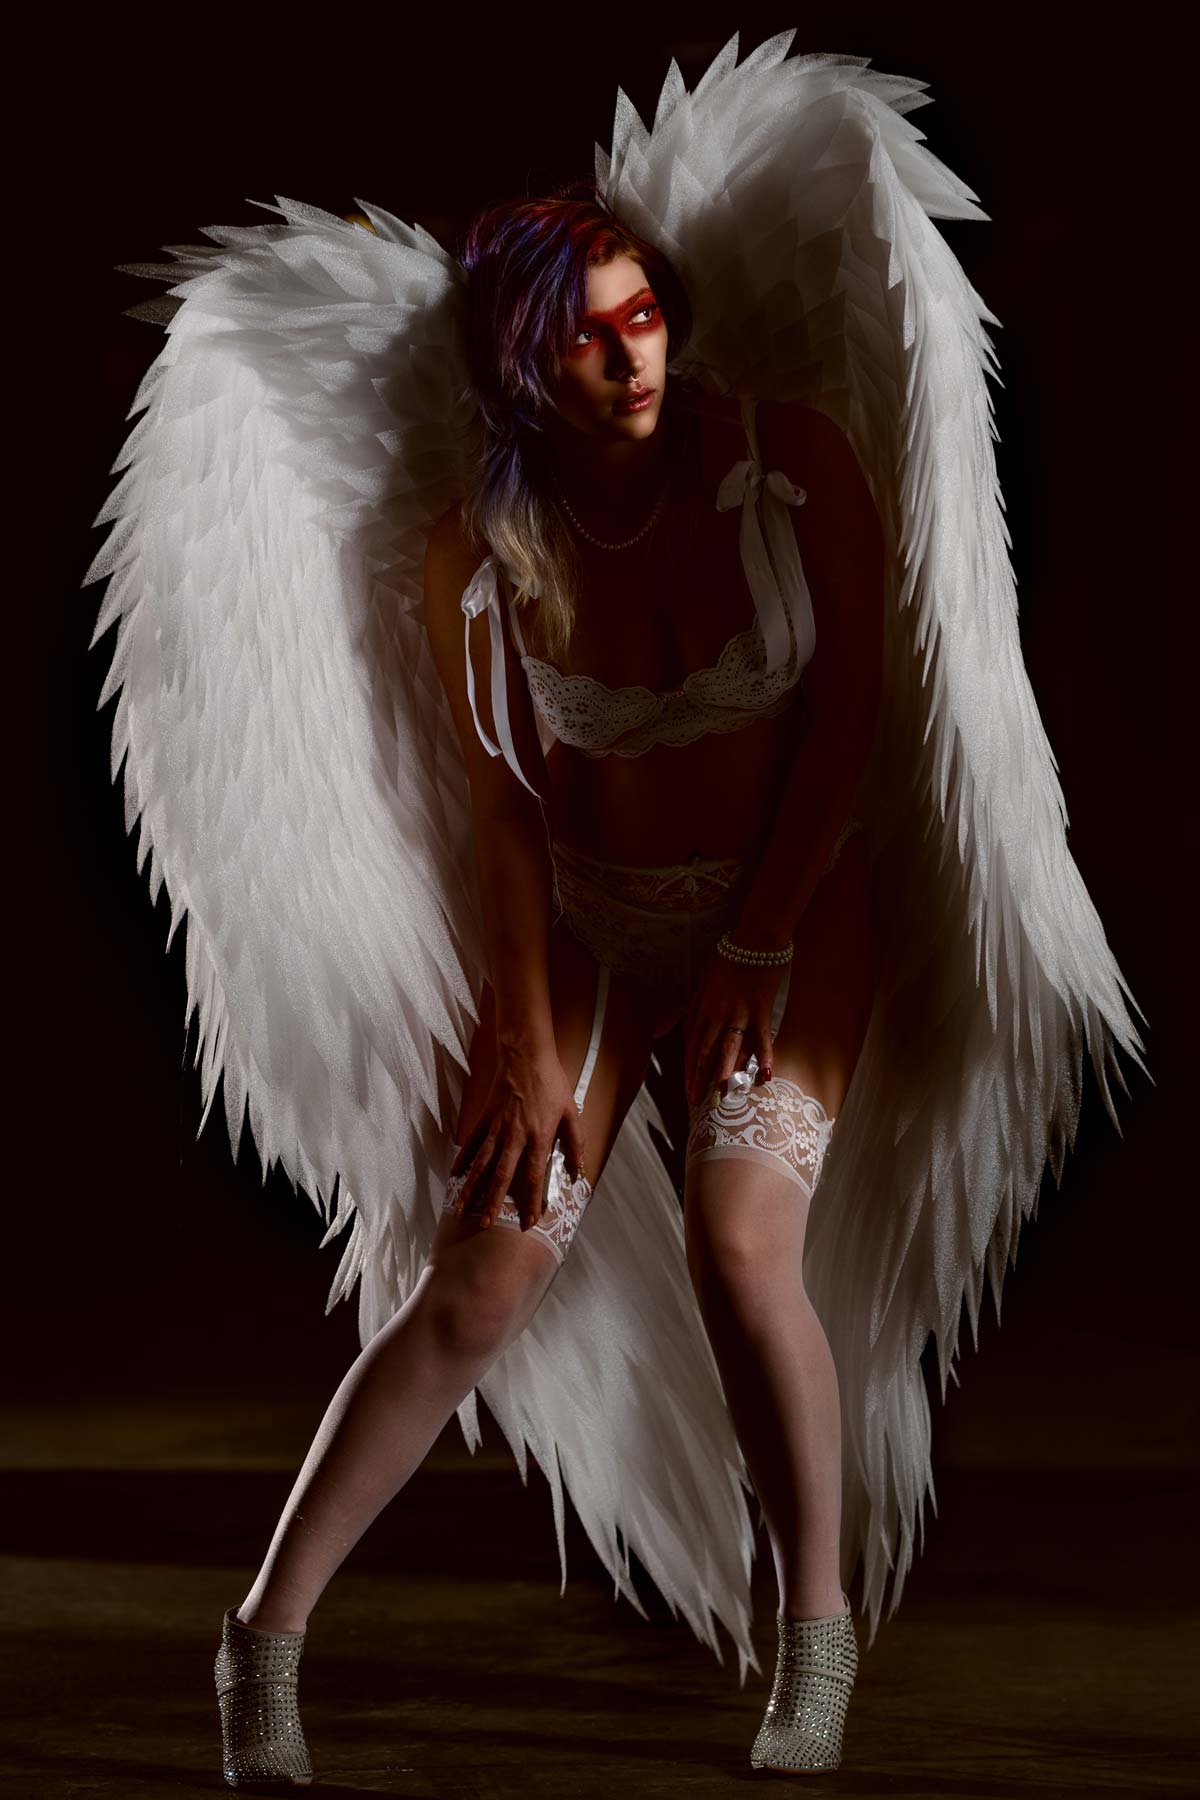 A woman with white wings posing in a dark room captured by Chris Spicks Photography, a creative Houston photographer.